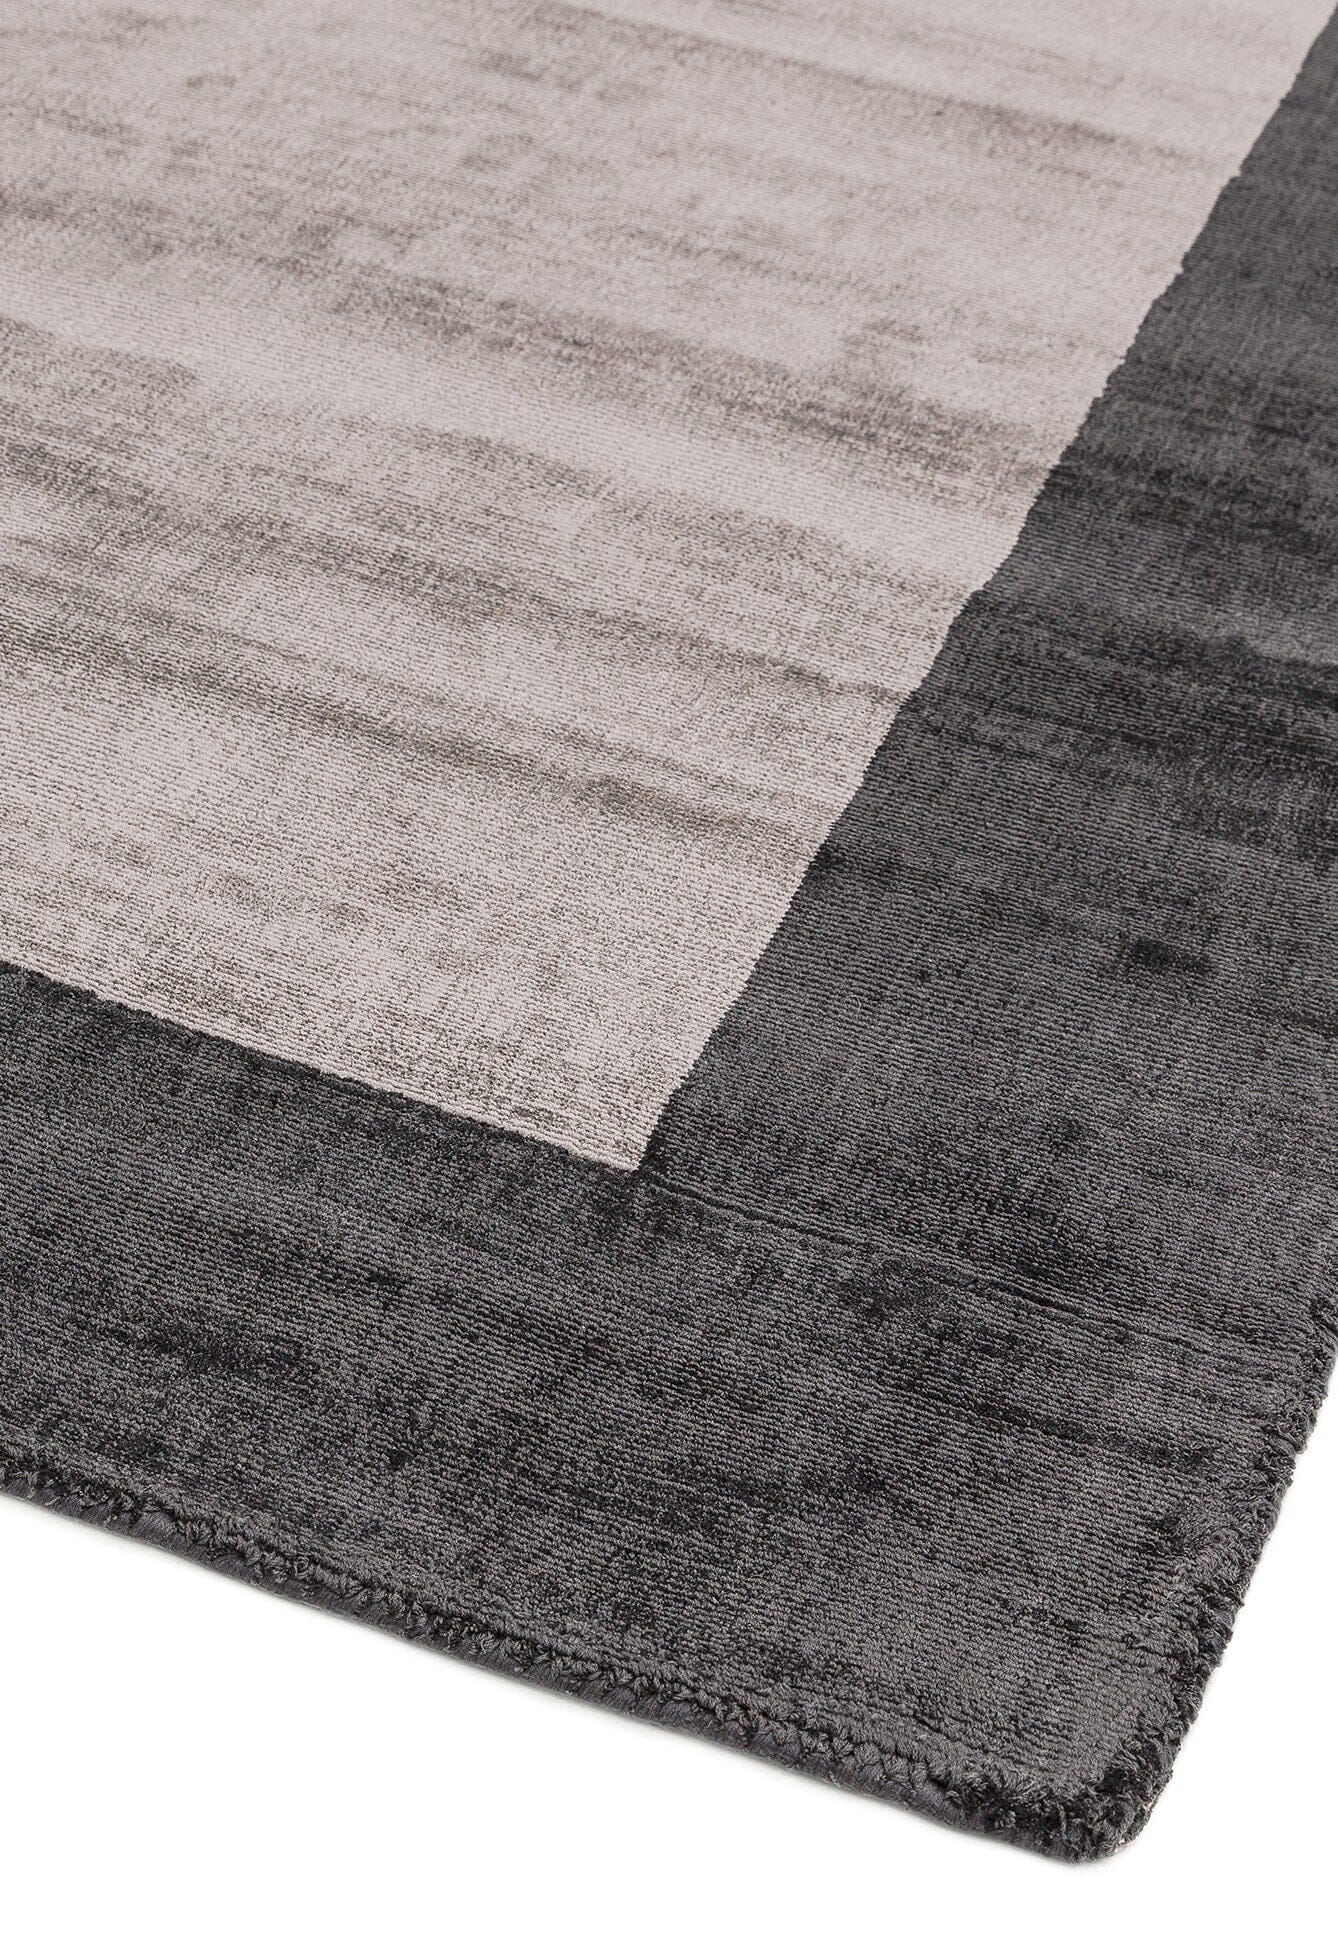  Asiatic Carpets-Asiatic Carpets Blade Hand Woven Rug Charcoal Silver - 200 x 290cm-Grey, Silver 285 